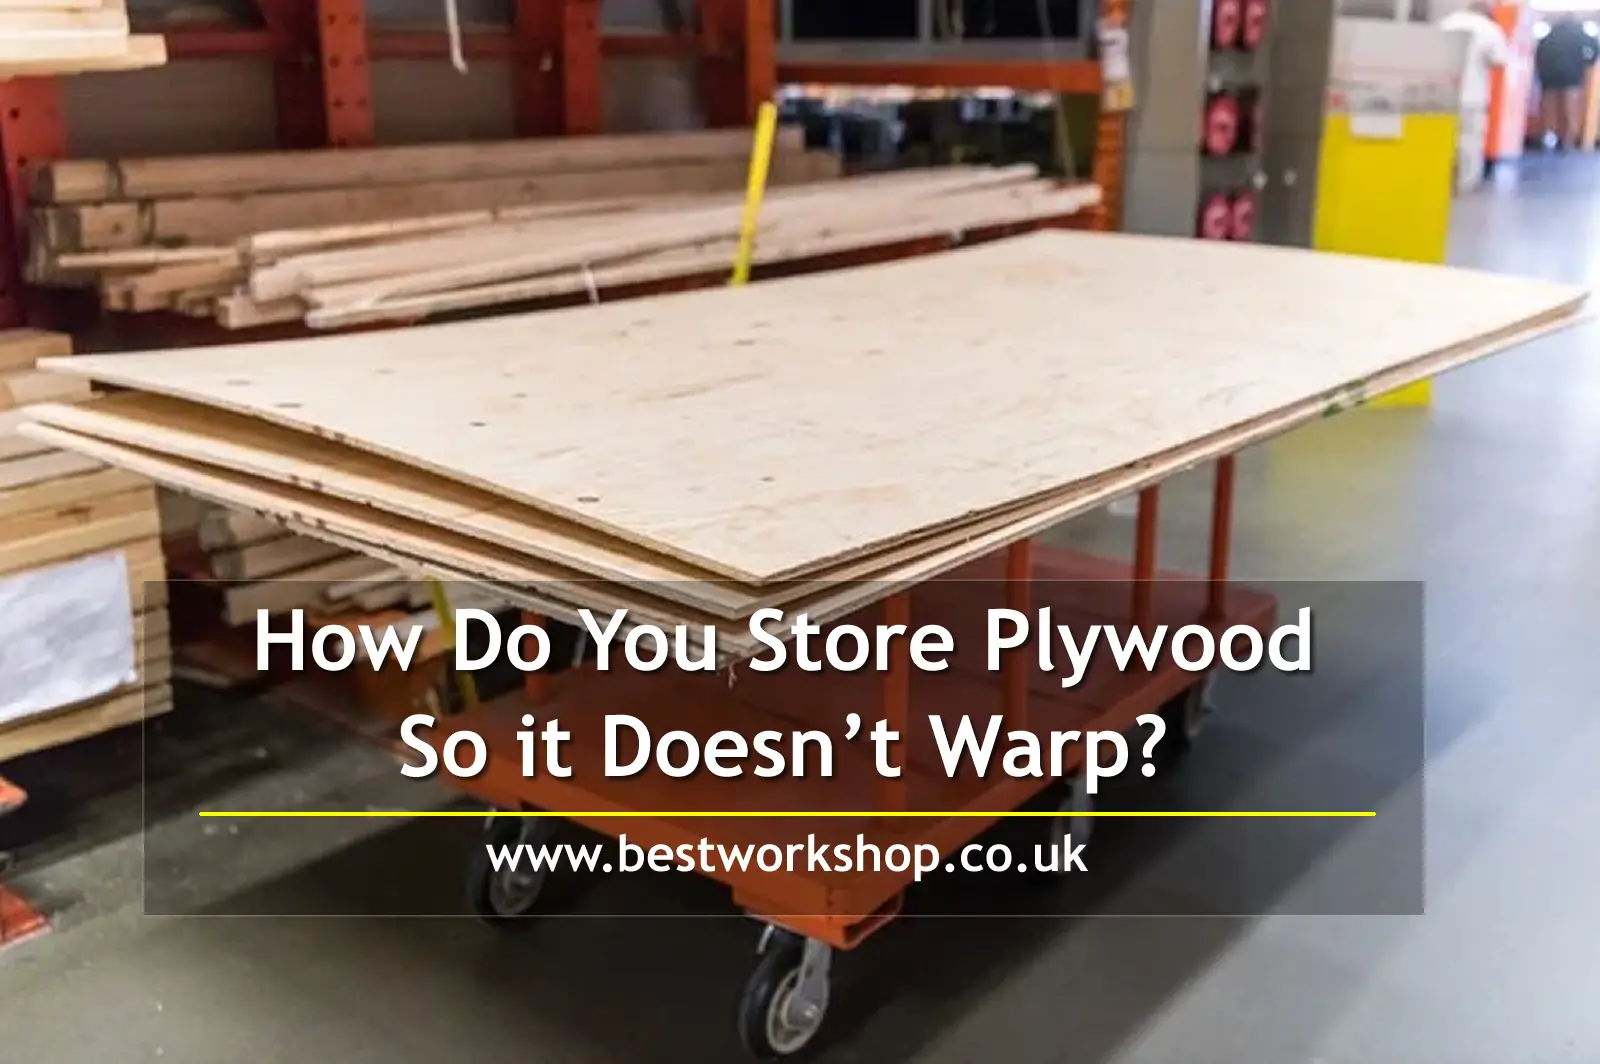 How Do You Store Plywood So it Doesn’t Warp? Solved!